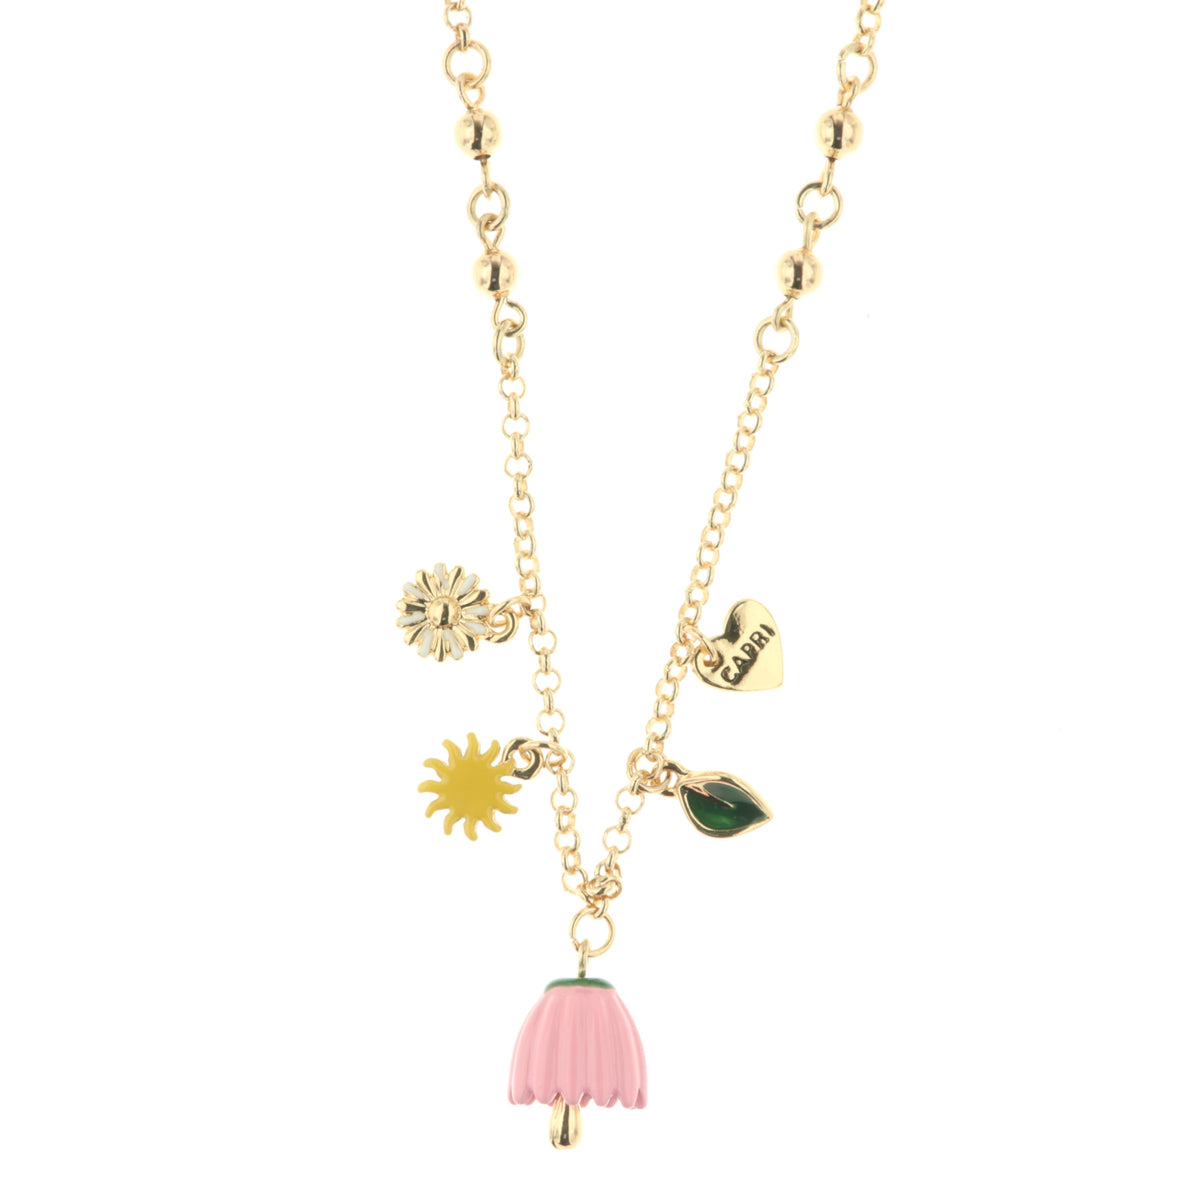 Metal necklace with bell in the shape of a pink flower, sun and heart with Capri